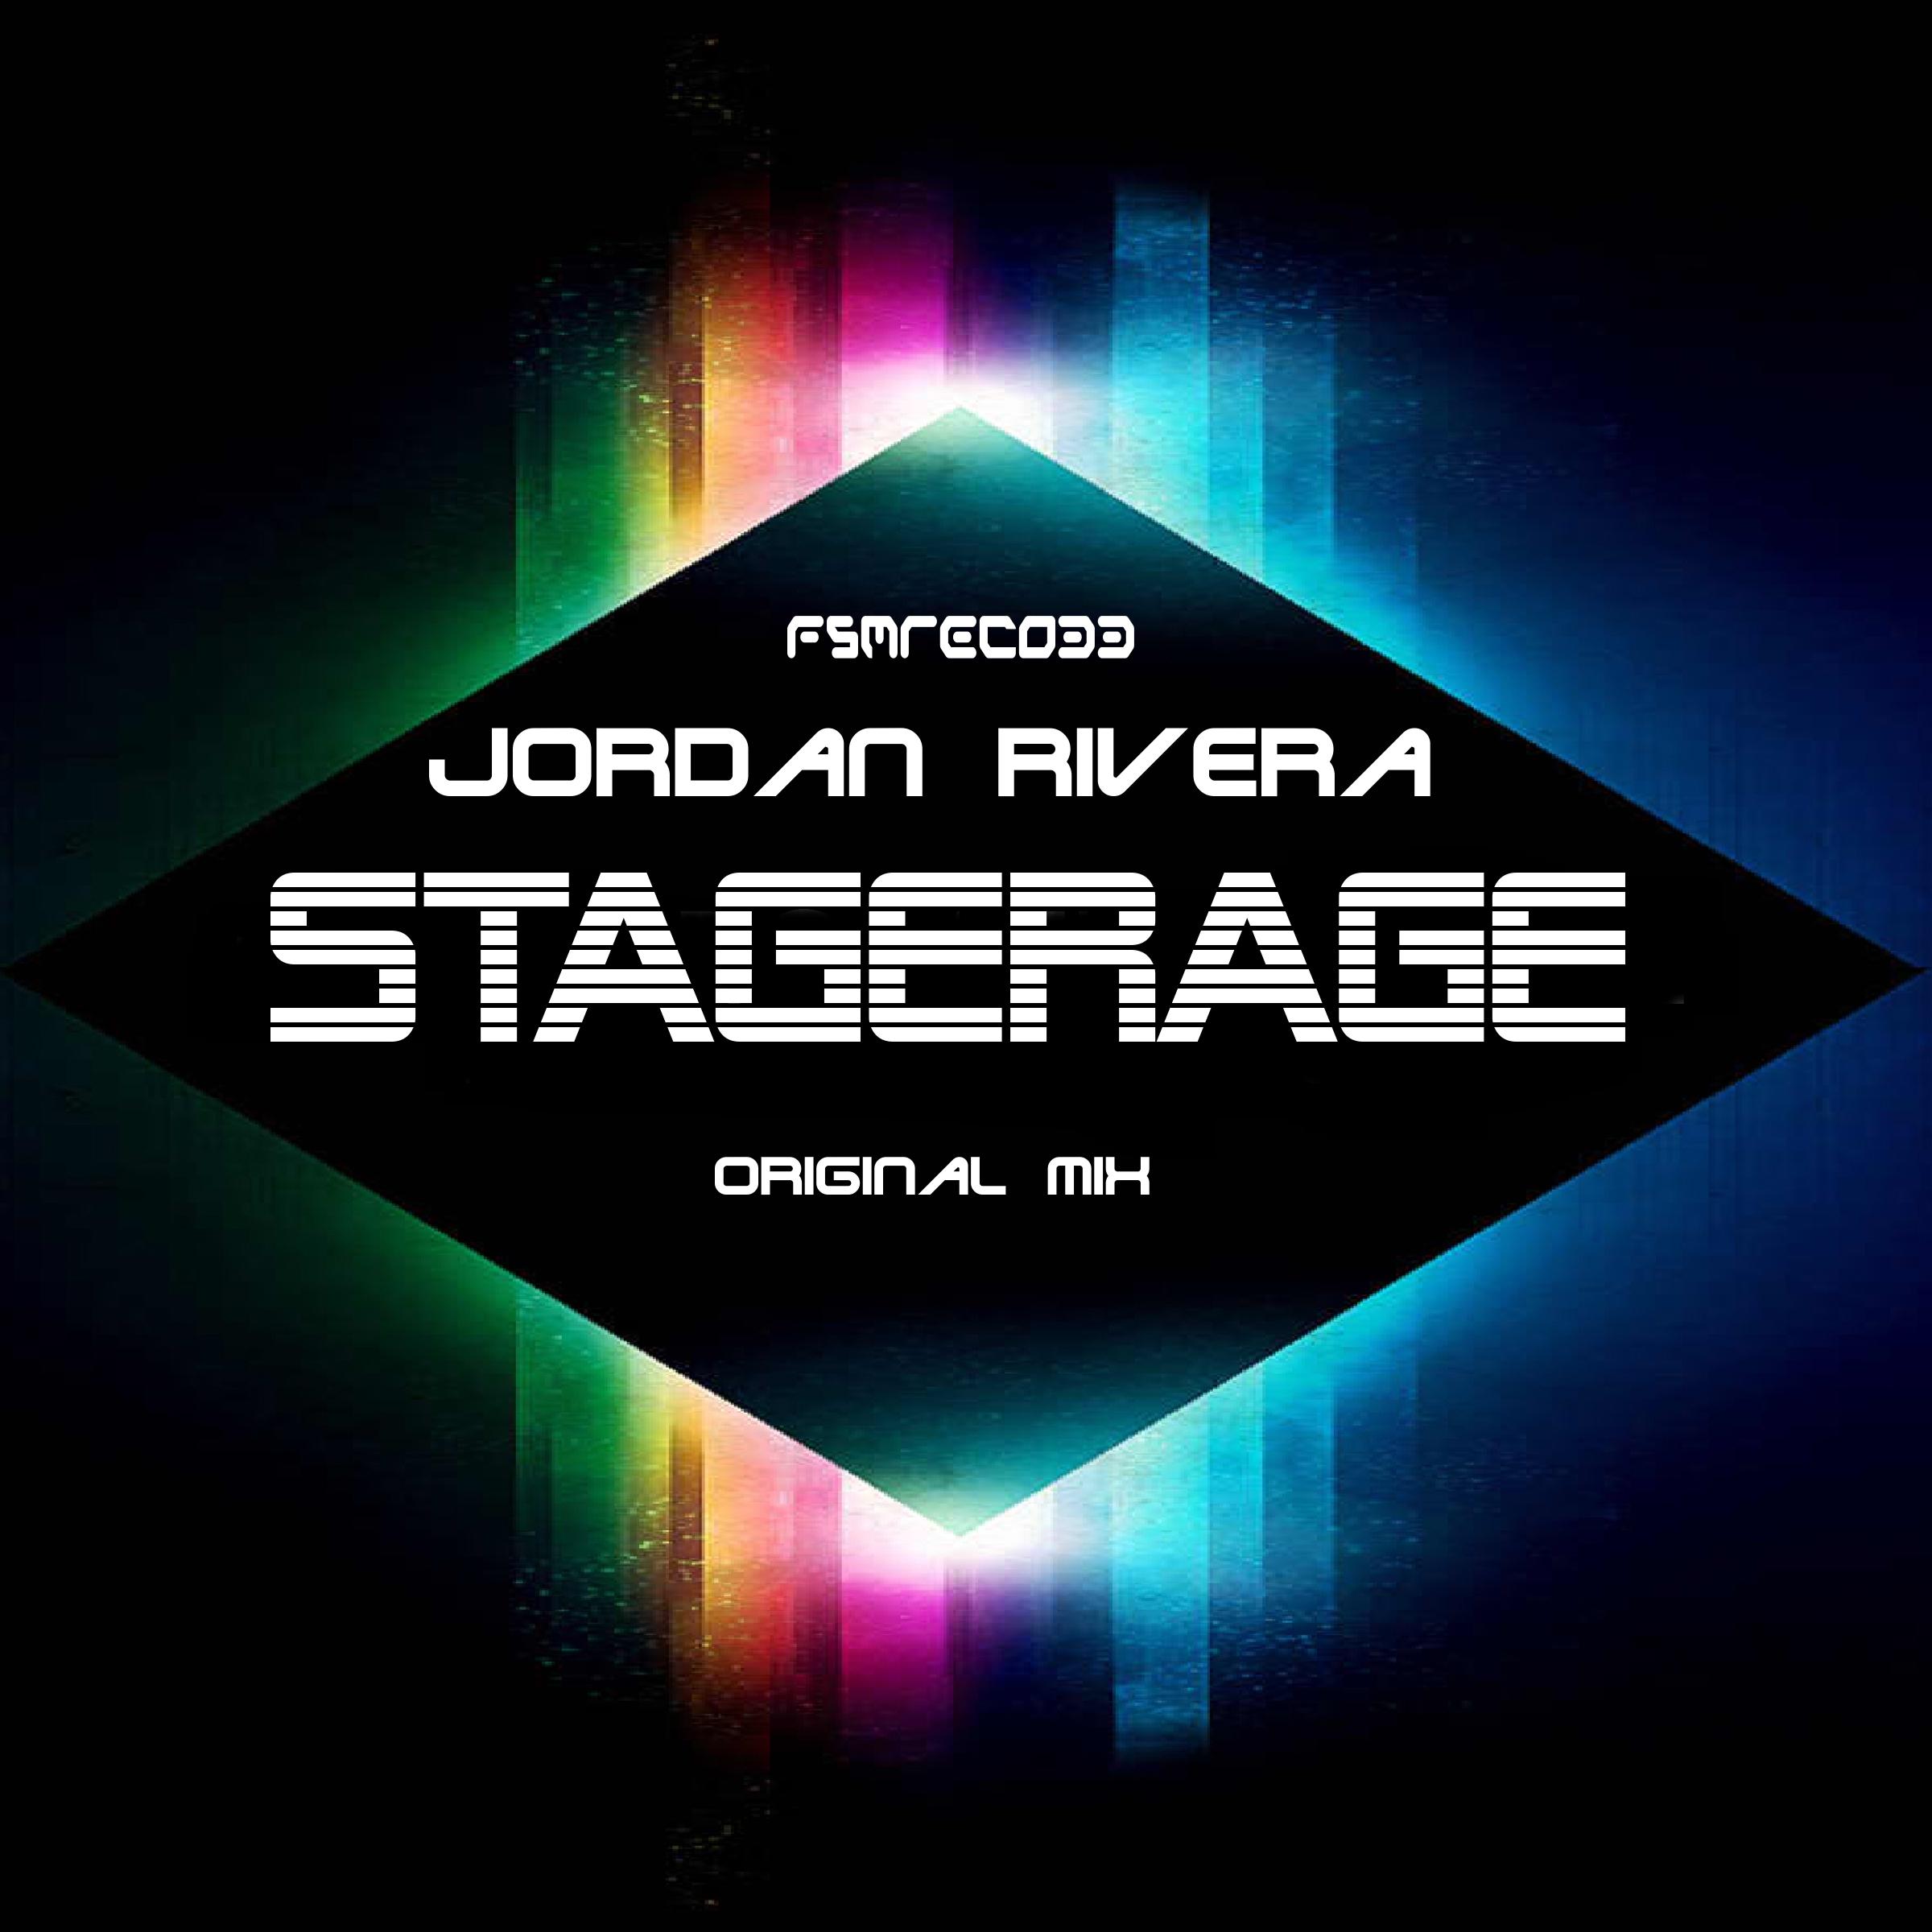 Stagerage